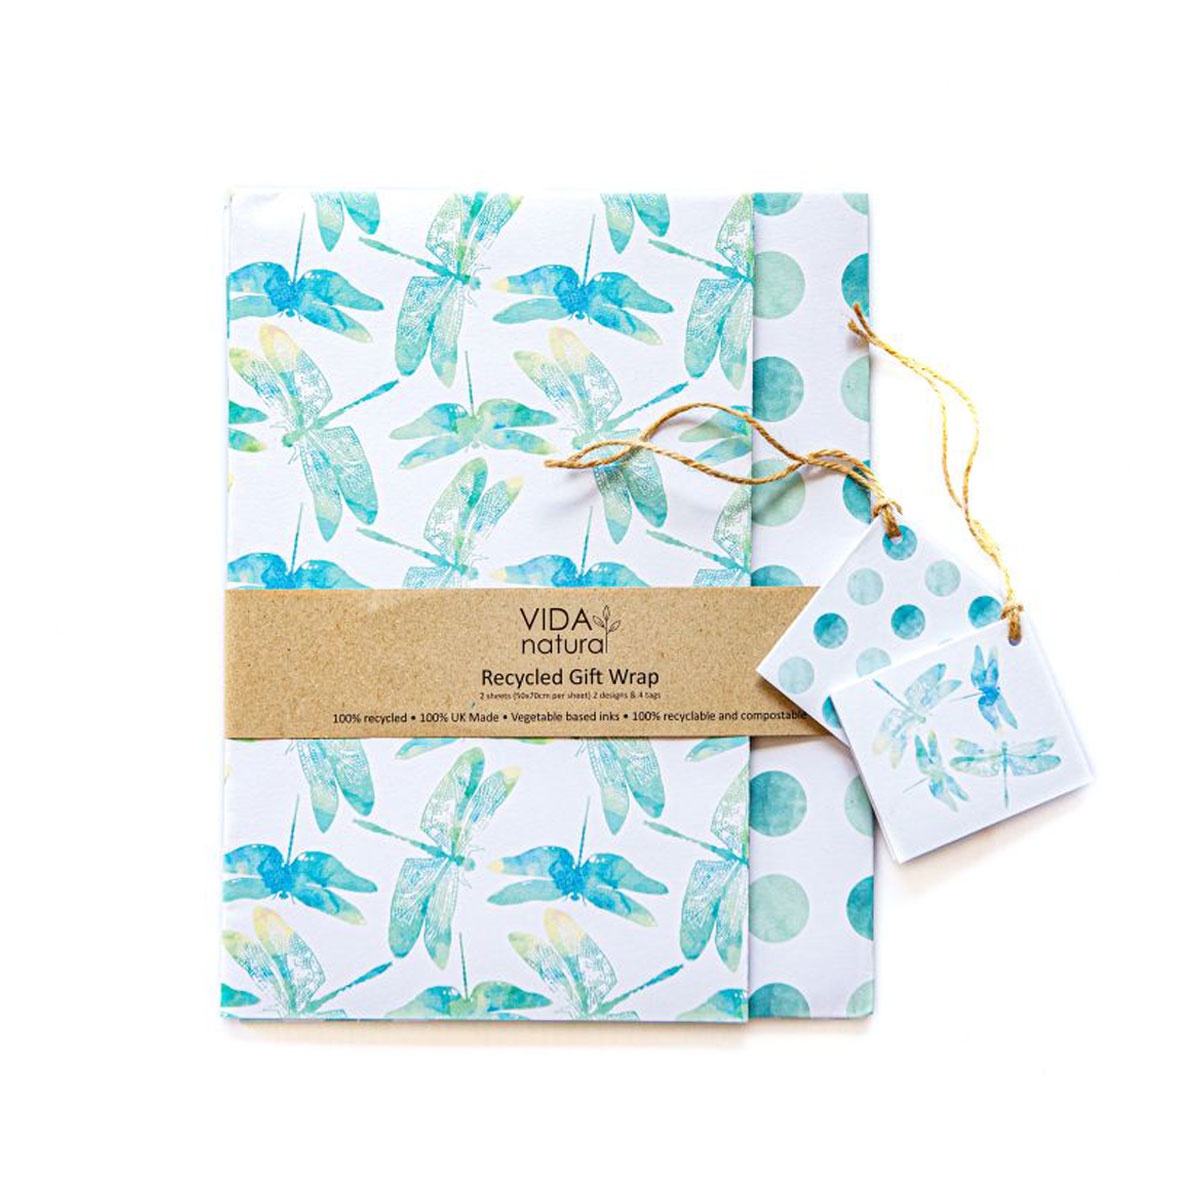 Vida Natural Recycled Gift Wrap With Gift Tags - Dragonflies & Spots